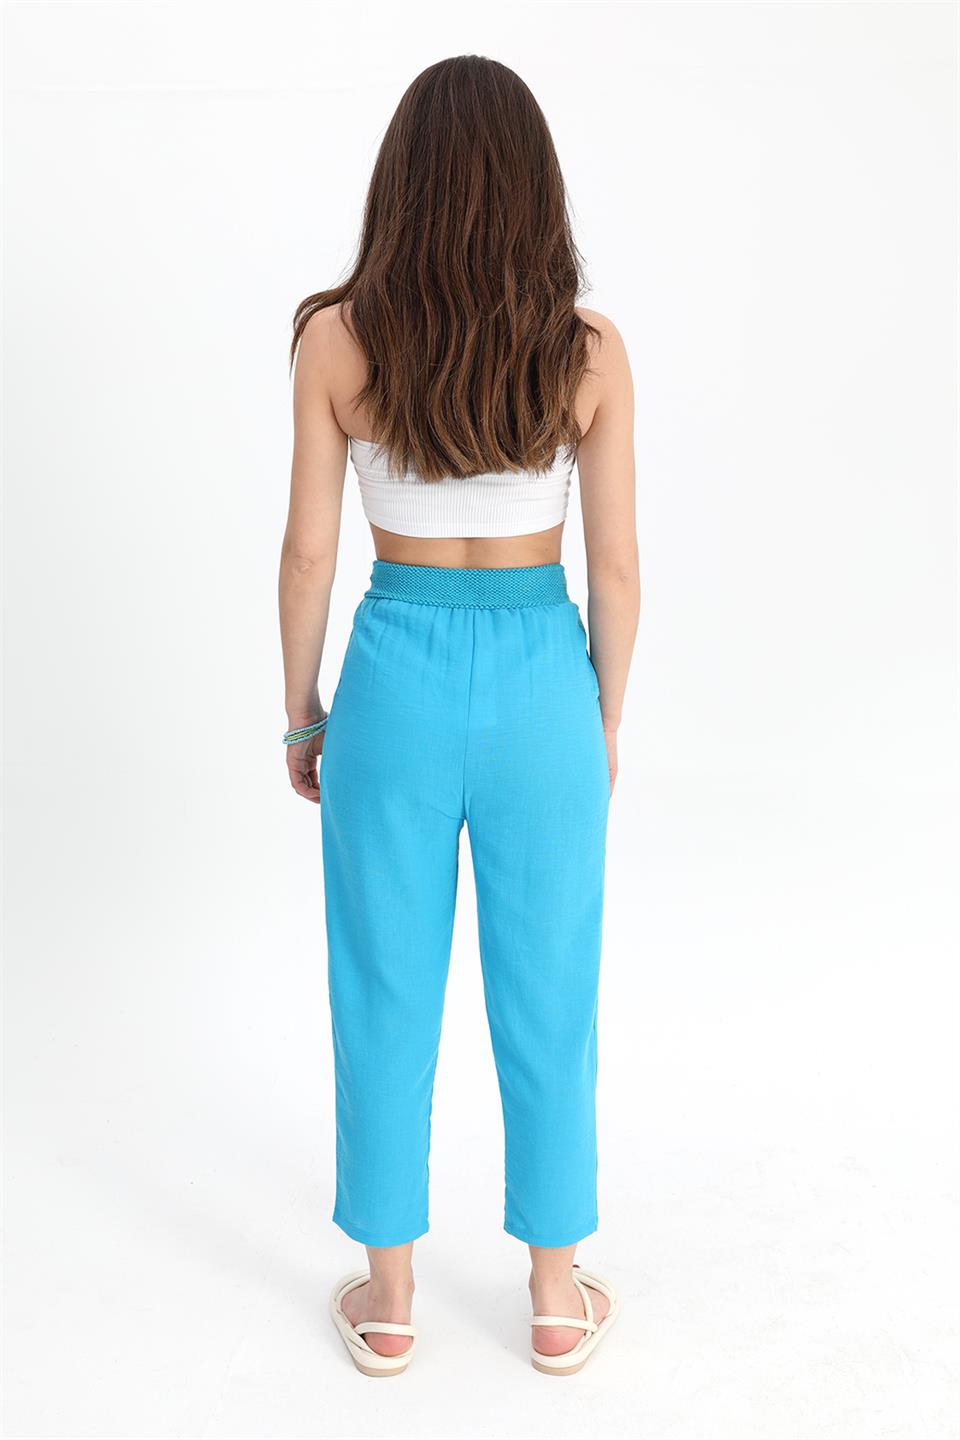 Women's Trousers Waist Elastic Corded Cotton Fabric - Blue - STREETMODE ™